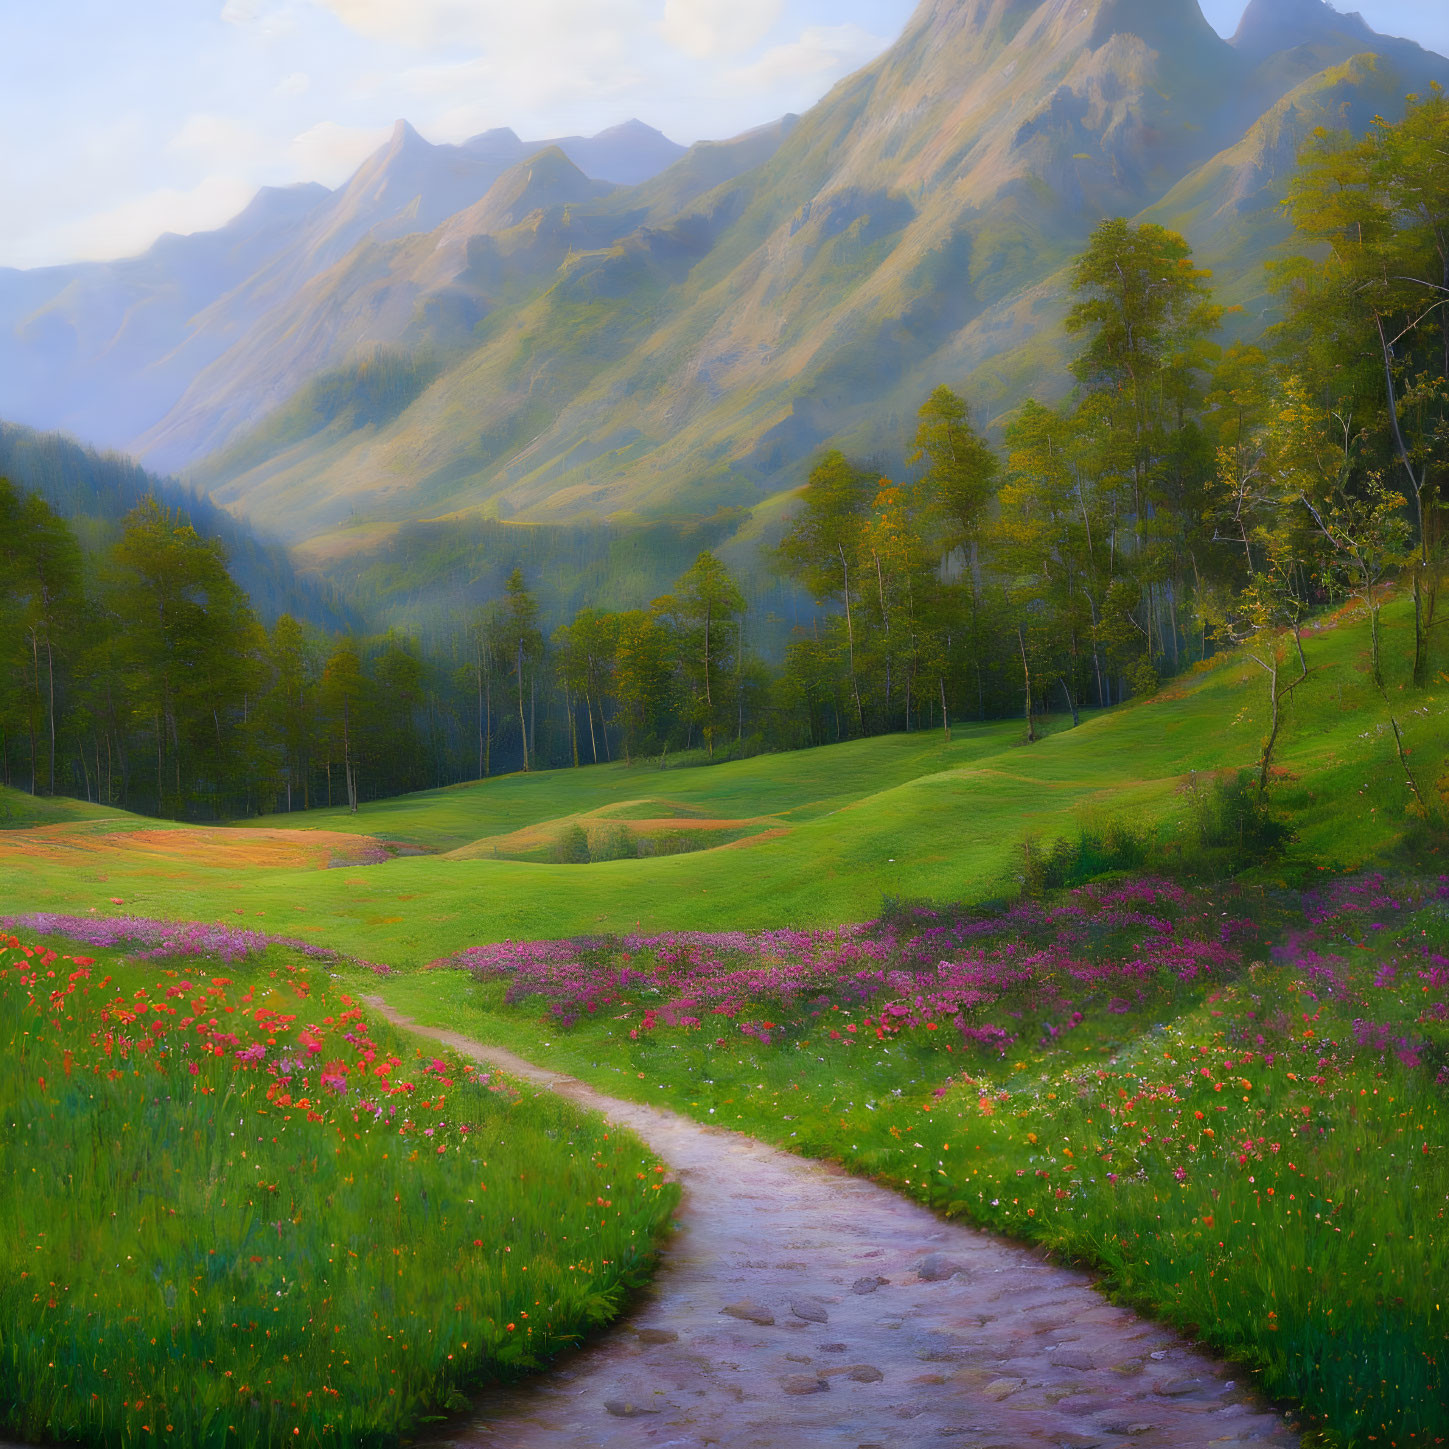 Tranquil landscape: meadow with wildflowers, trees, and mountains